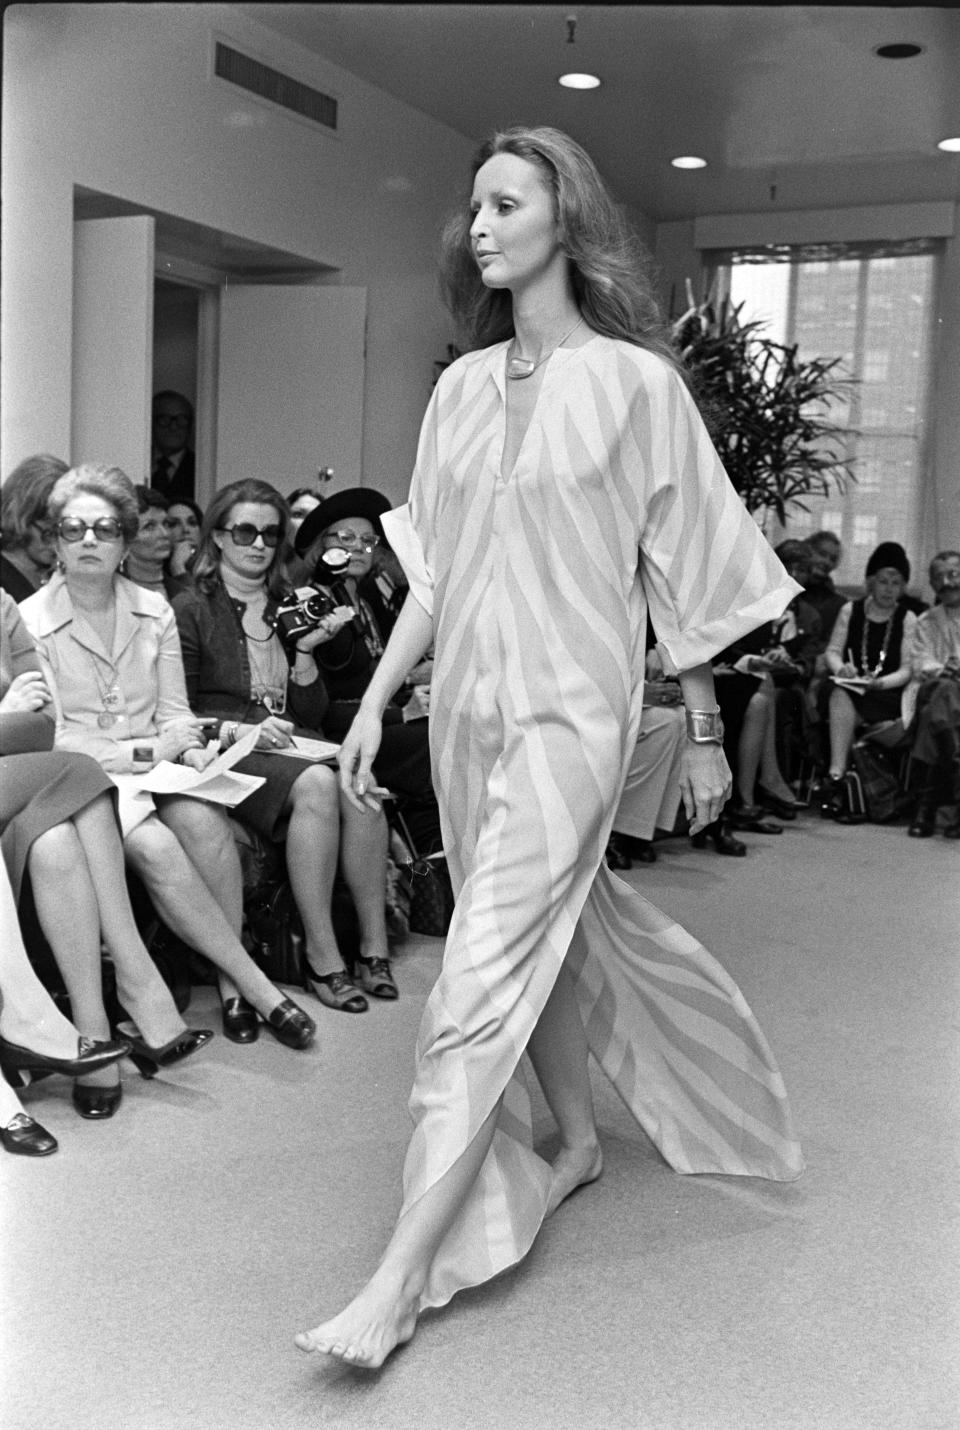 Halston Summer 1973 Ready to Wear Collection Runway.